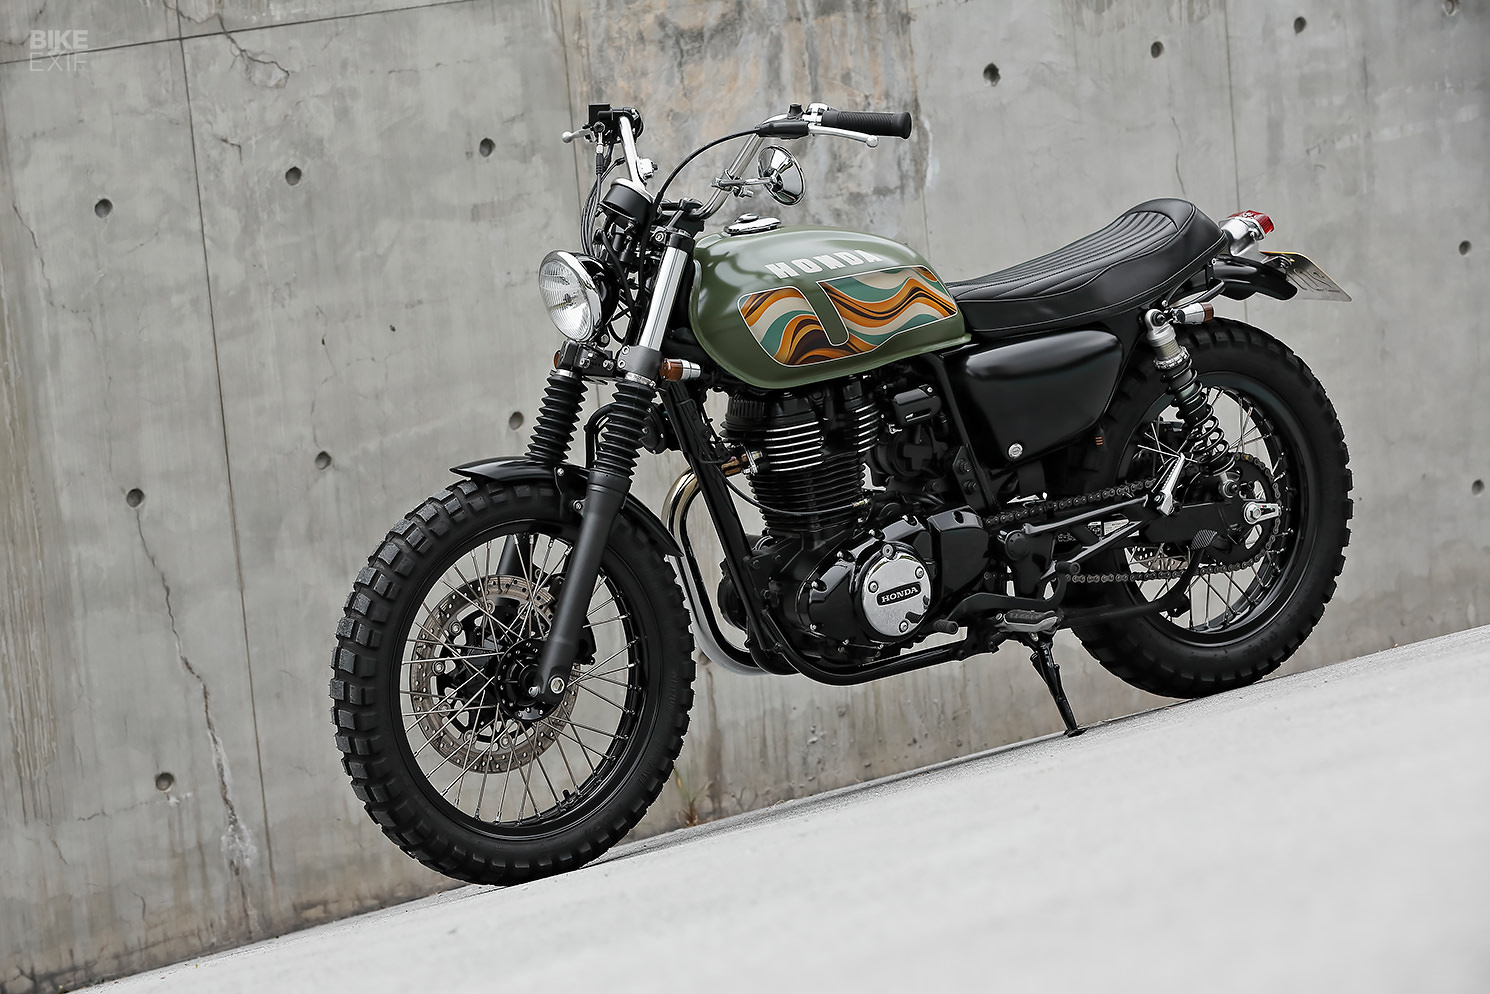 Grab-and-go: A custom kit for the Honda CB350 from Taiwan | Bike EXIF